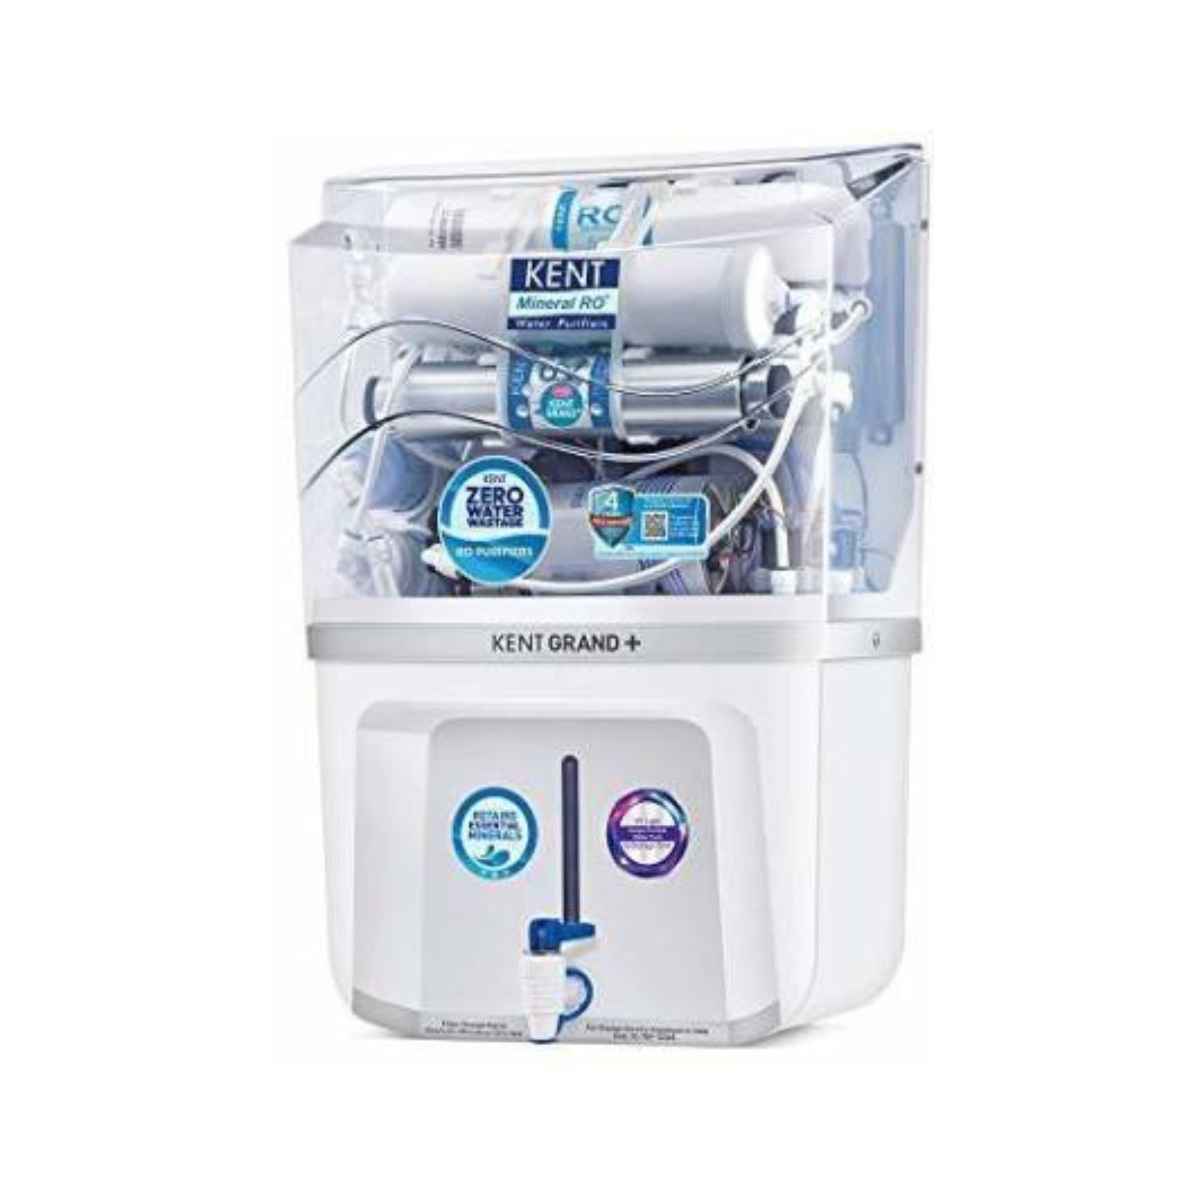 KENT GRAND PLUS ZWW 9 LTR MINERAL RO+UV+UF+TDS CONTROL TWater Purifier